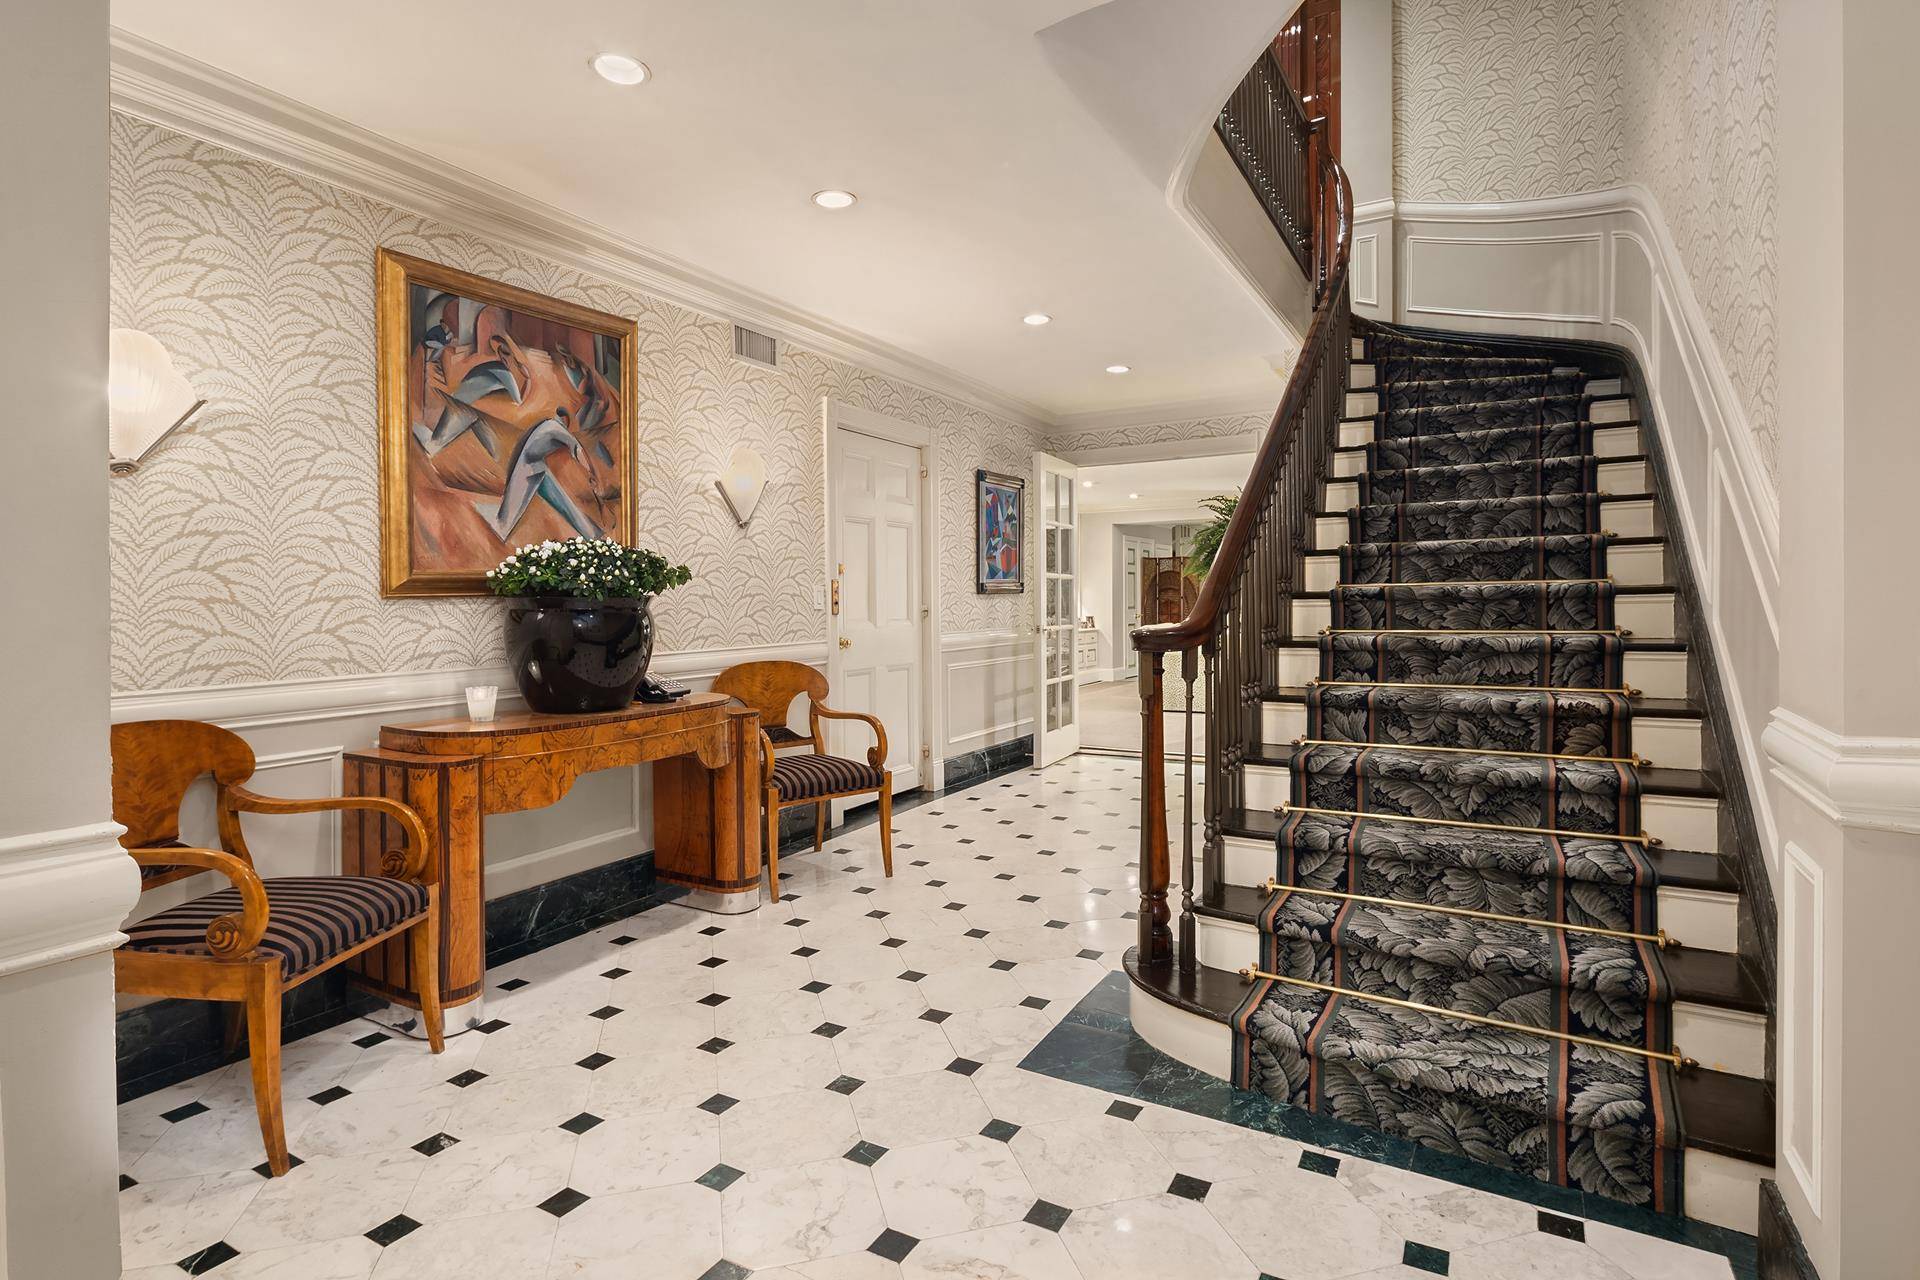 53 East 80th Street is a spectacular 22' wide, 6 story single family townhouse with 14 rooms, 7 bedrooms, 7 full bathrooms, 7 fireplaces, 2 powder rooms and elevator.